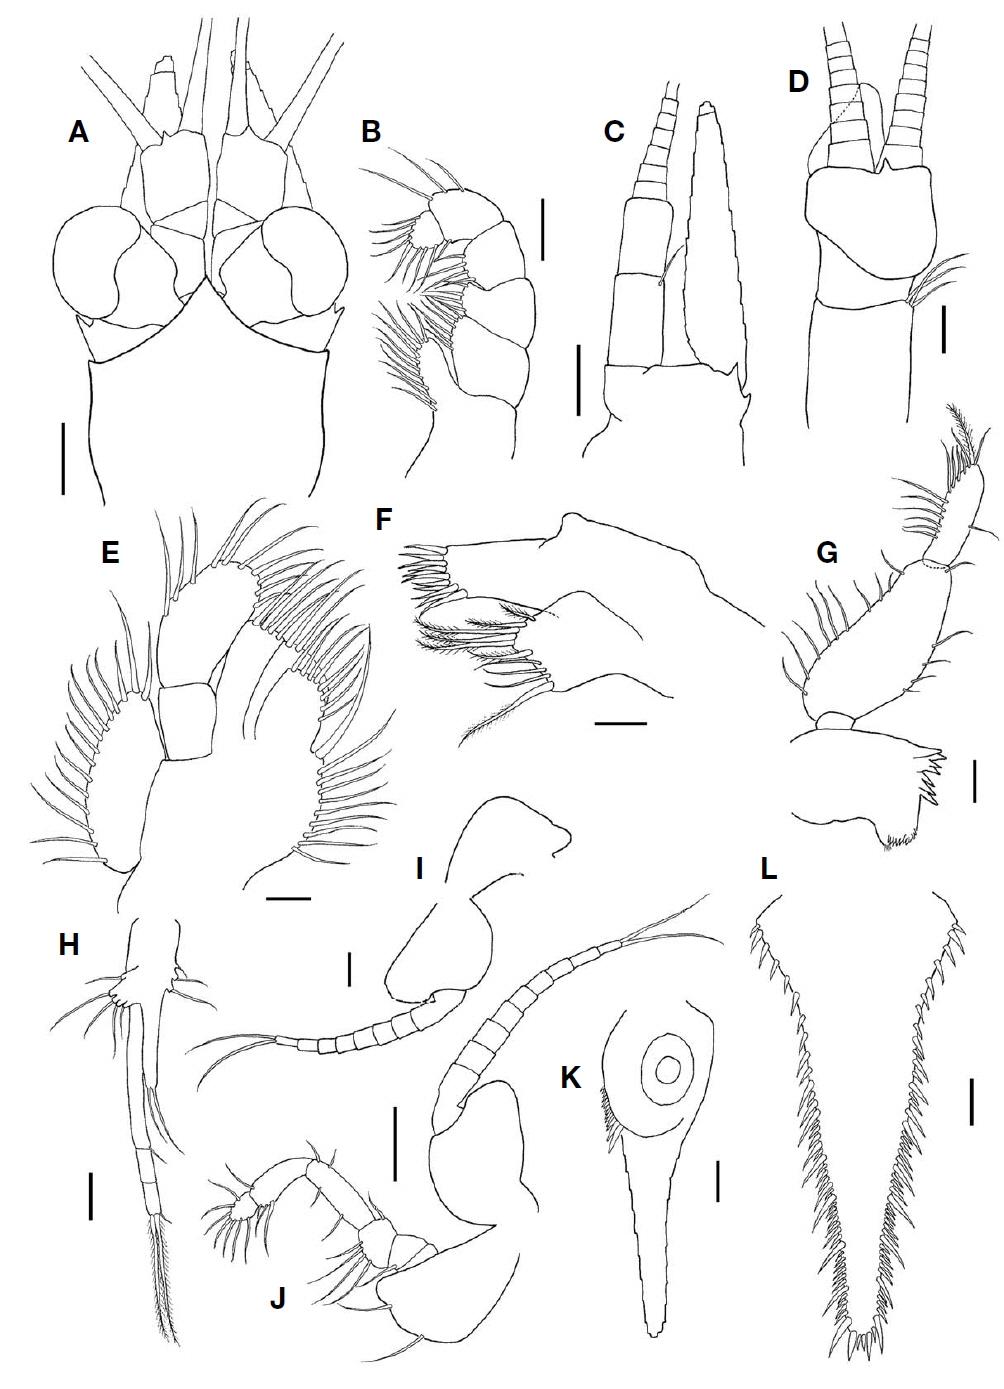 Nipponomysis tenuiculus (Ii, 1940), male. A, Anterior part of carapace and cephalic appendages; B, Endopod of first thoracopod; C, Antenna; D, Antennule; E, Maxilla; F, Maxillule; G, Mandible; H, Fourth pleopod; I, Exopod of third thoracopod; J, Second thoracopod; K, Inner uropod; L, Telson. Scale bars: A=0.25 mm, B-D, H, K, L=0.1 mm, E-G=0.05 mm, I, J=0.2 mm.